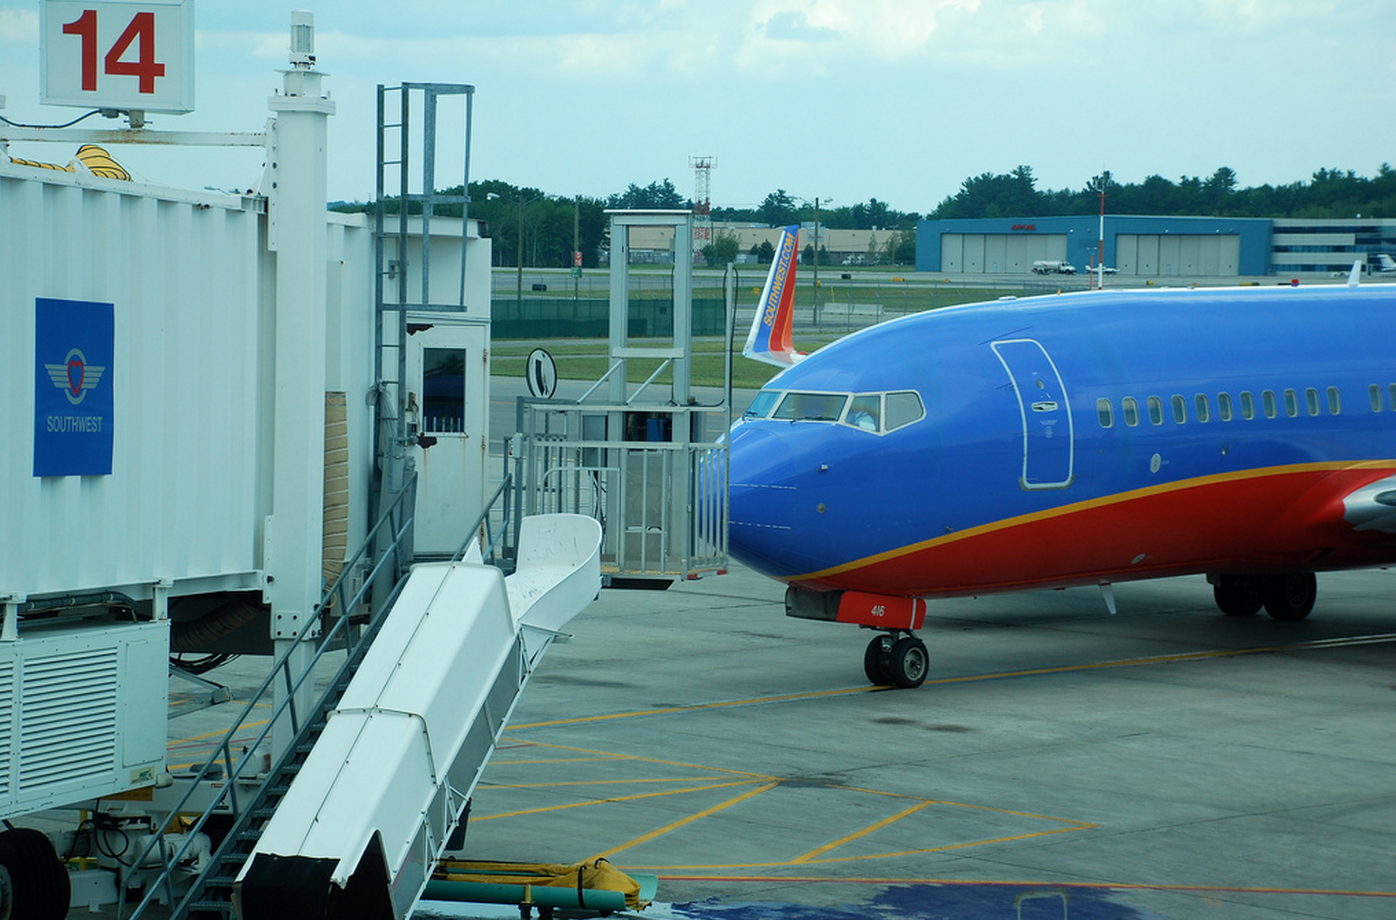 Southwest Baggage Handlers Say Too Many Flights + More Passengers + Not Enough Planes = Delays